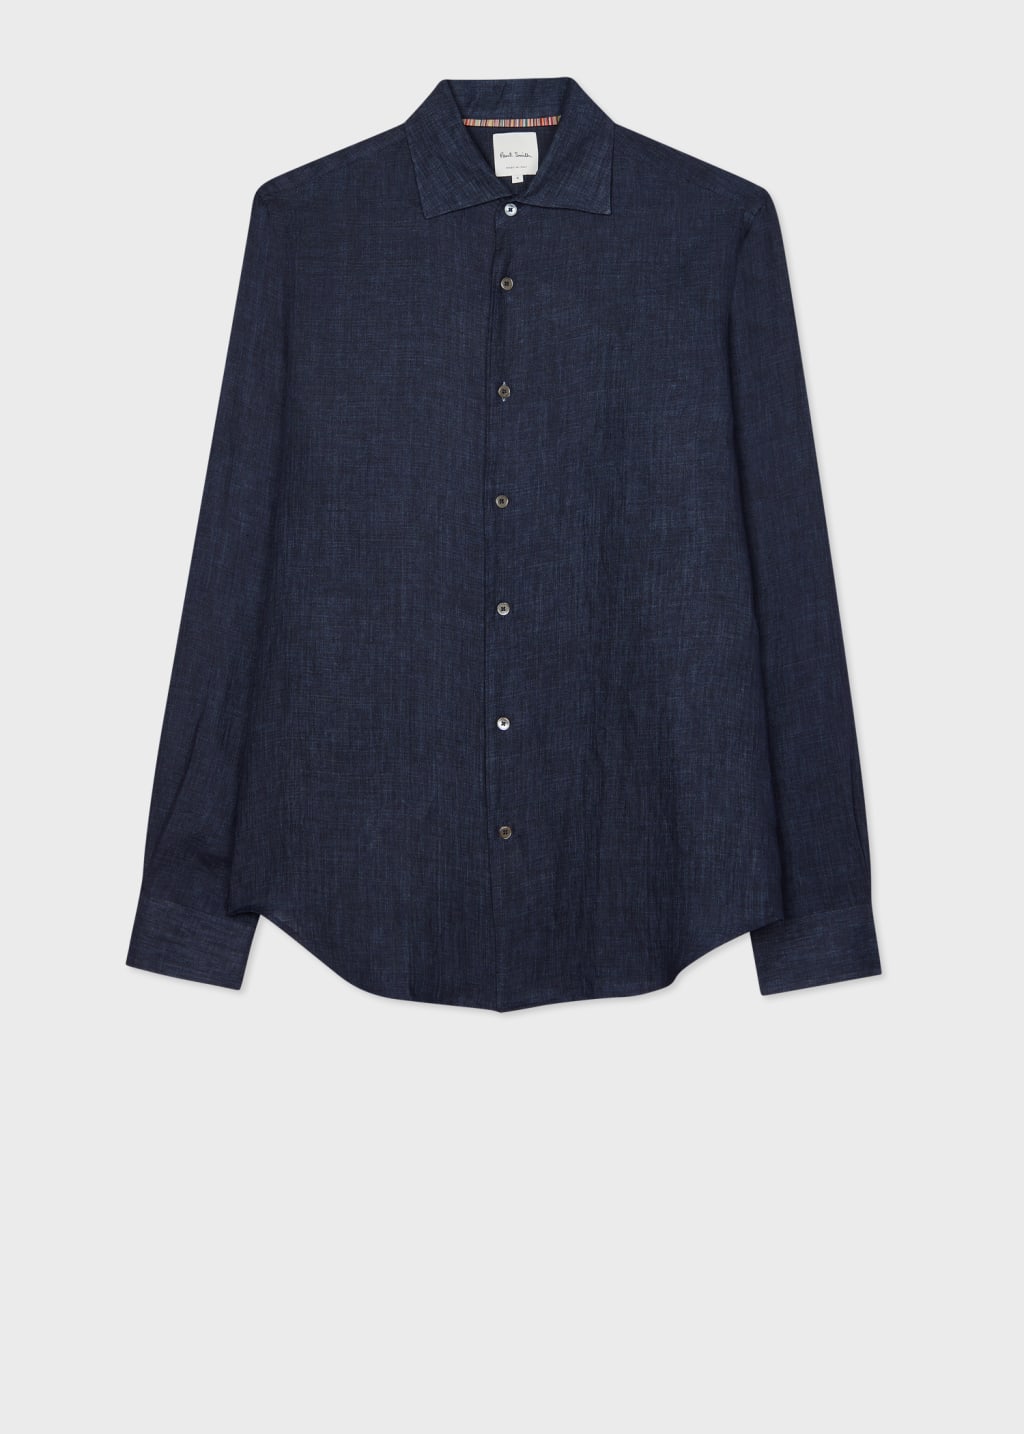 Front View - Slim-Fit Navy Linen Shirt Paul Smith